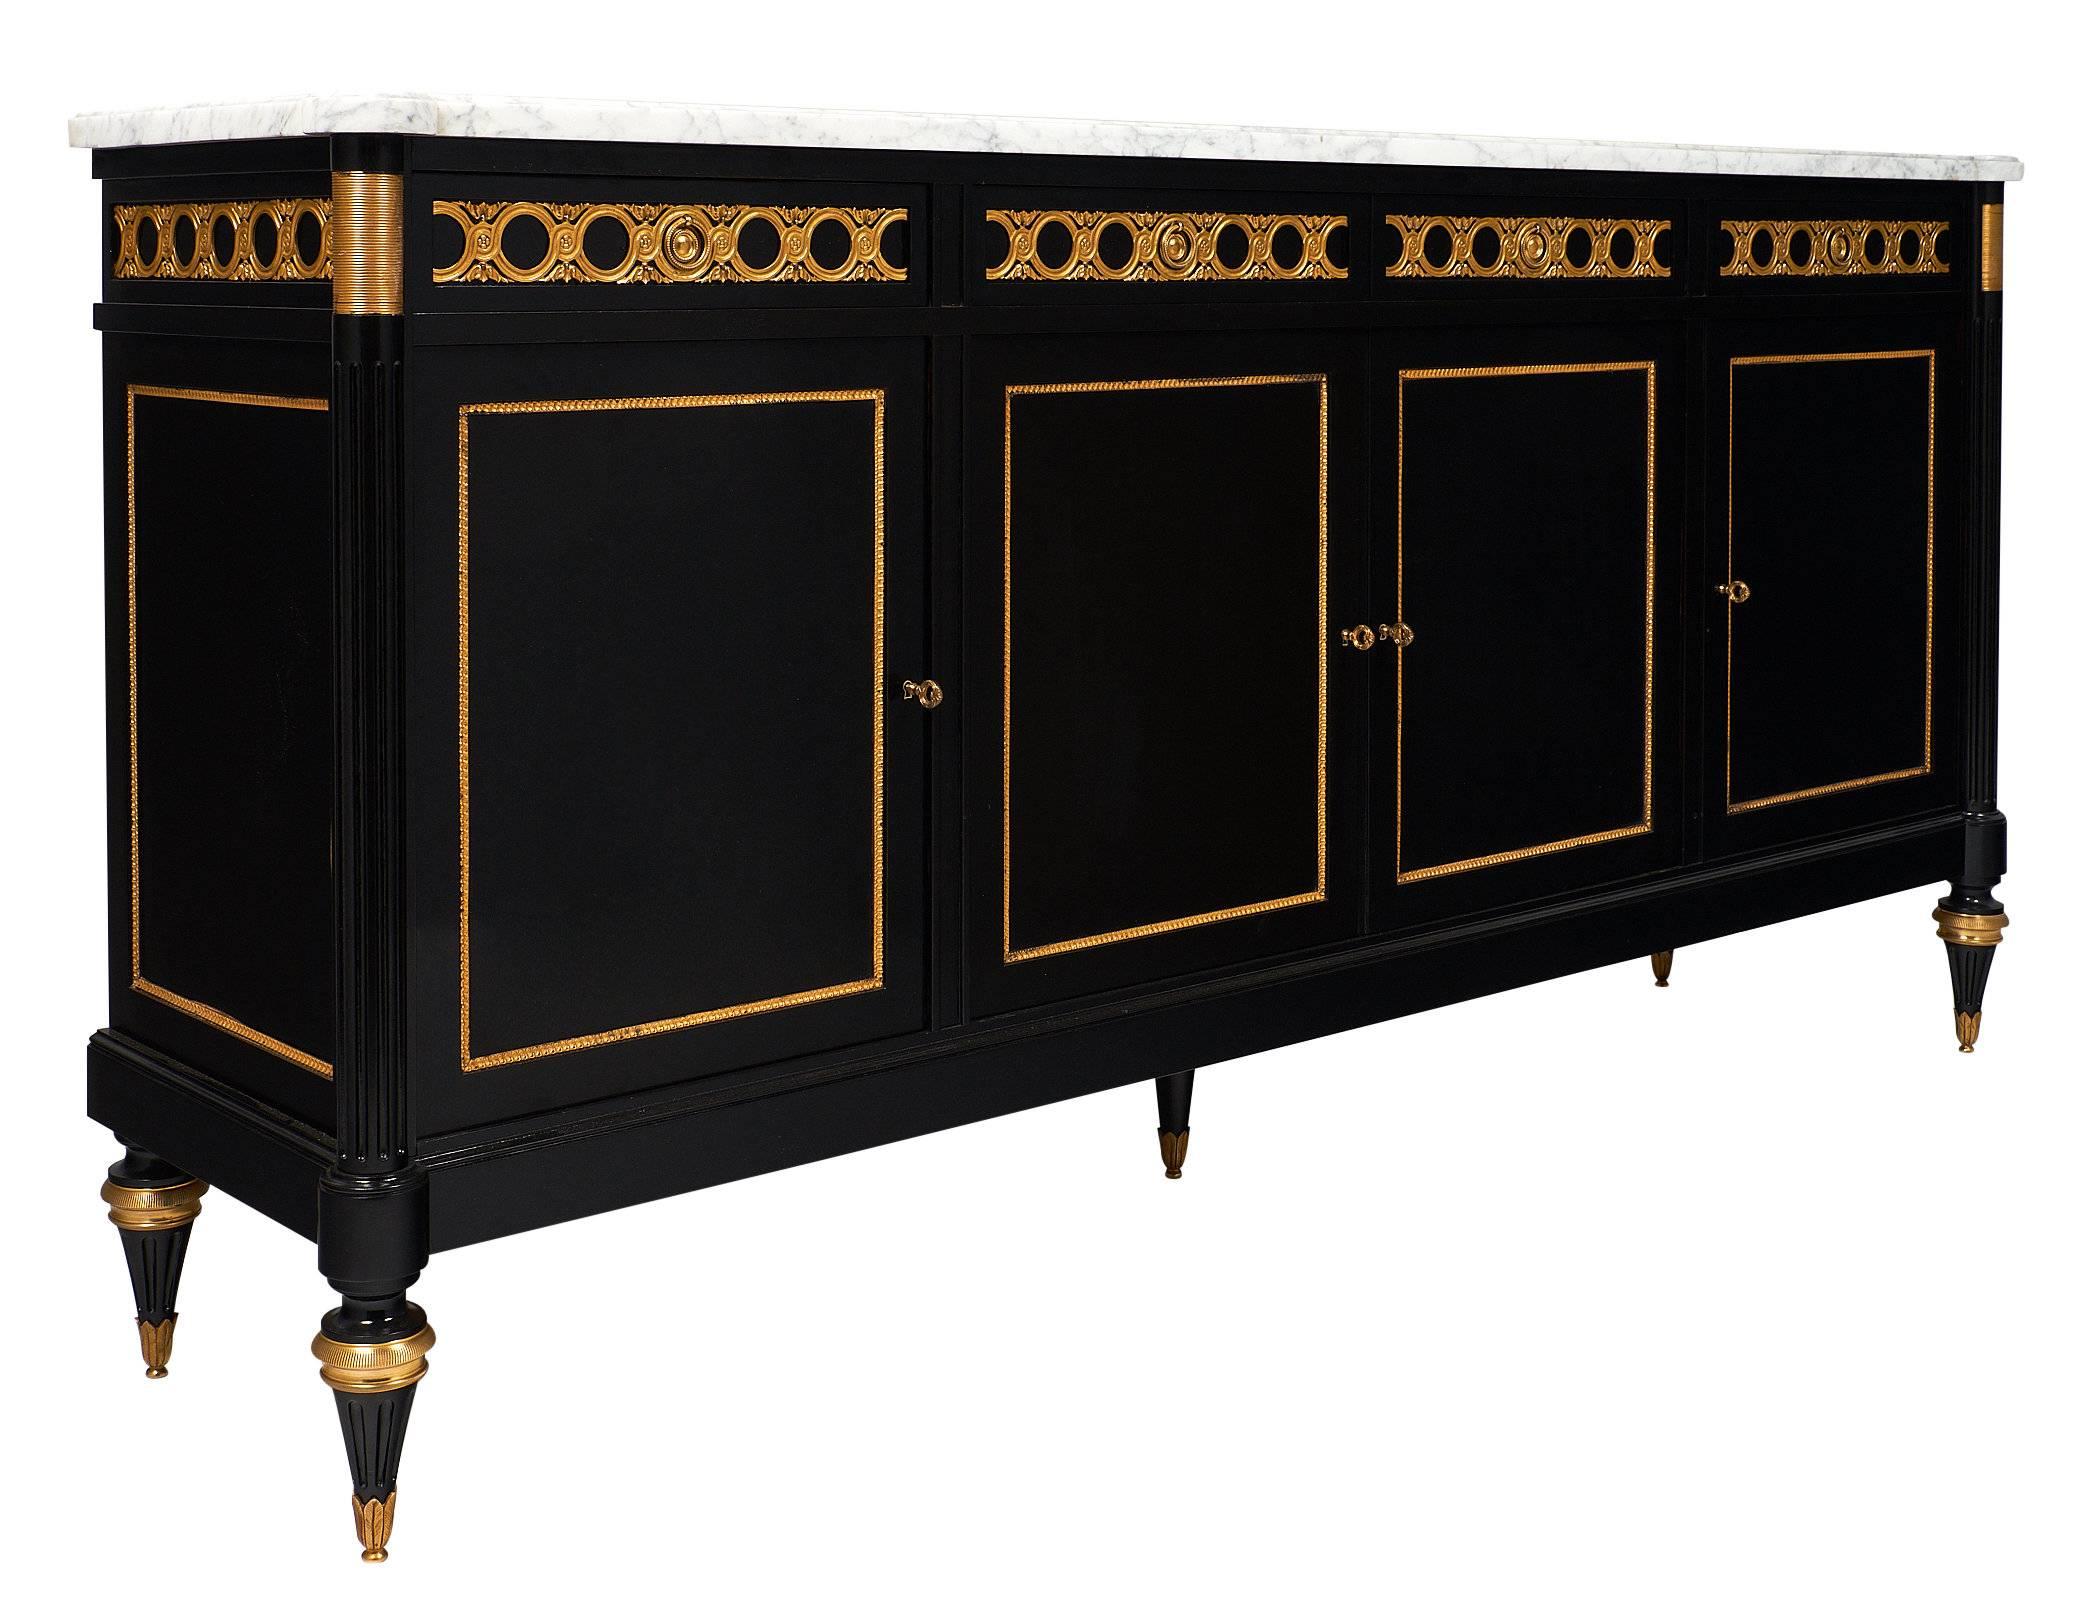 A sumptuous buffet or enfilade in the manner of iconic Parisian design firm Maison Jansen. This stunning credenza features four doors, four drawers, a white lightly veined Carrara marble top, and rests on fluted and tapered legs. The buffet boasts